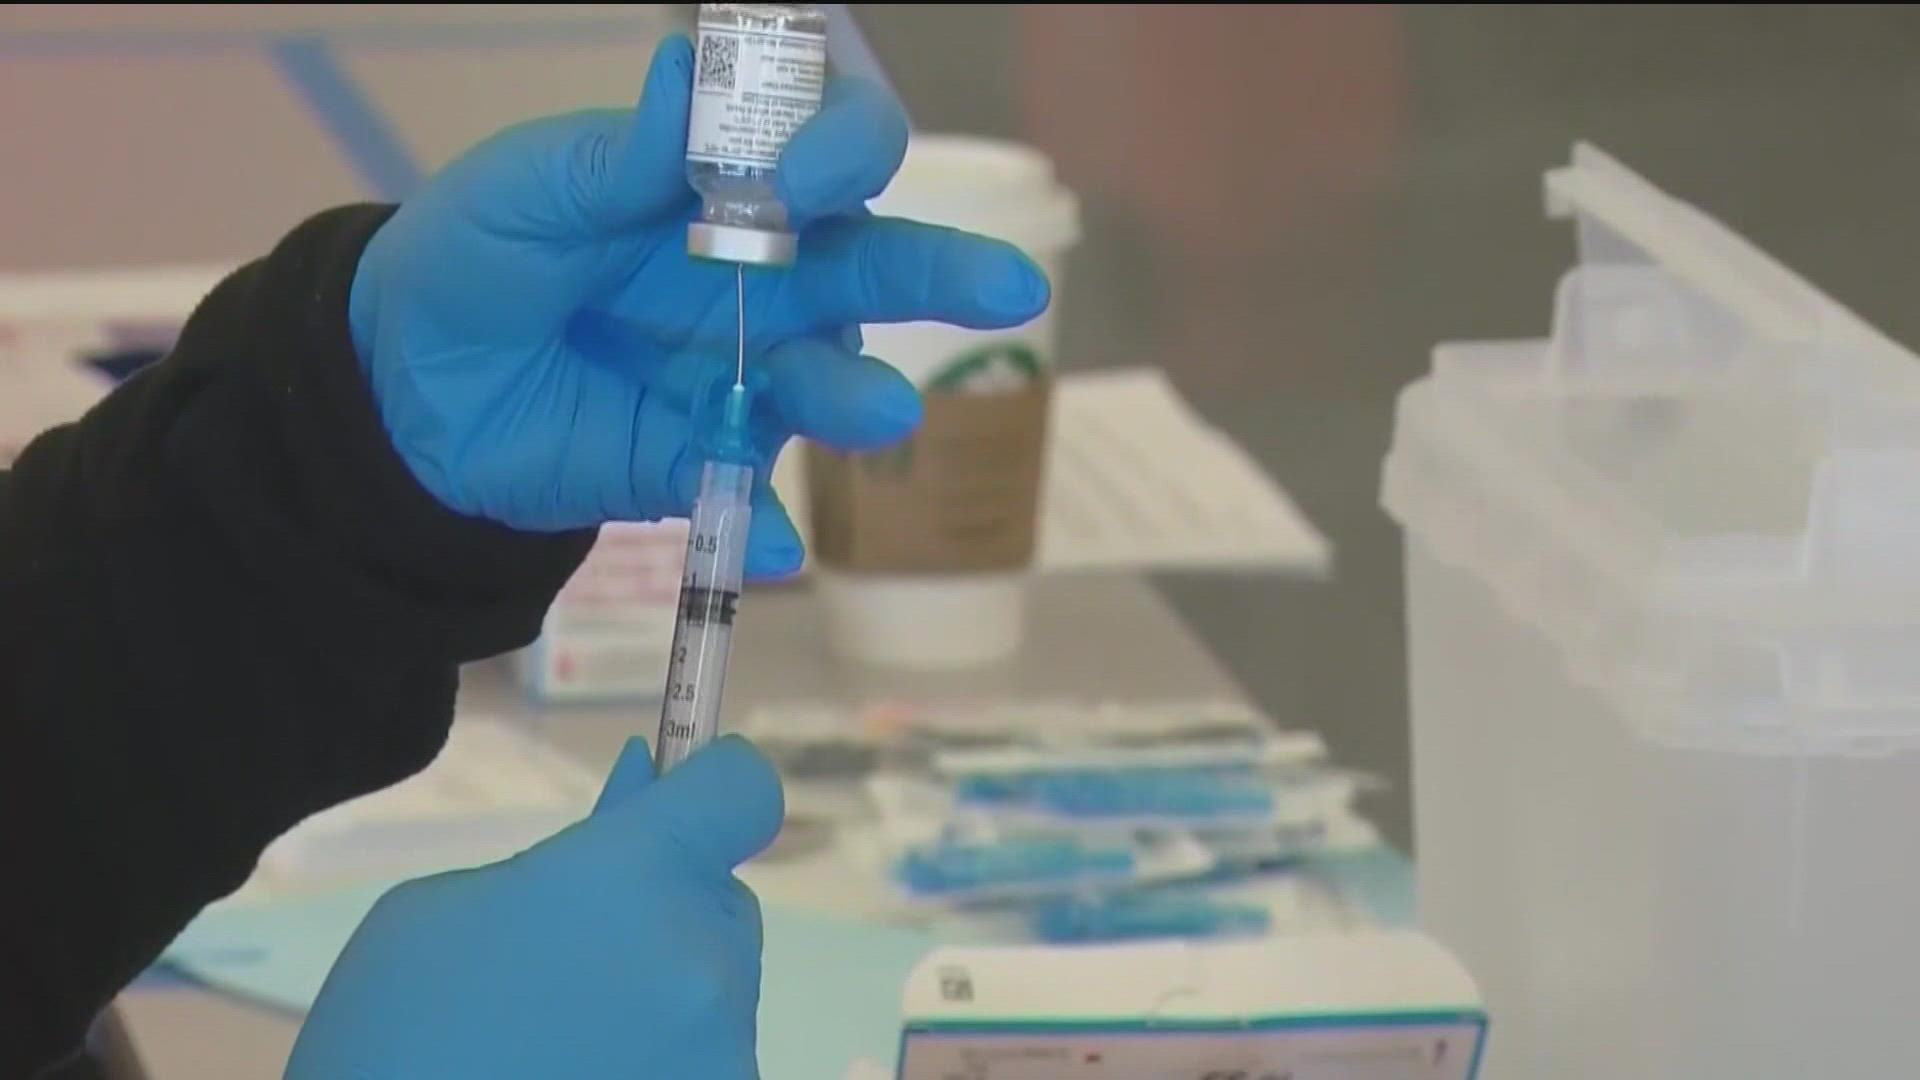 San Diego County is telling families to start making appointments now for children under 5 years of age to get COVID-19 vaccines.